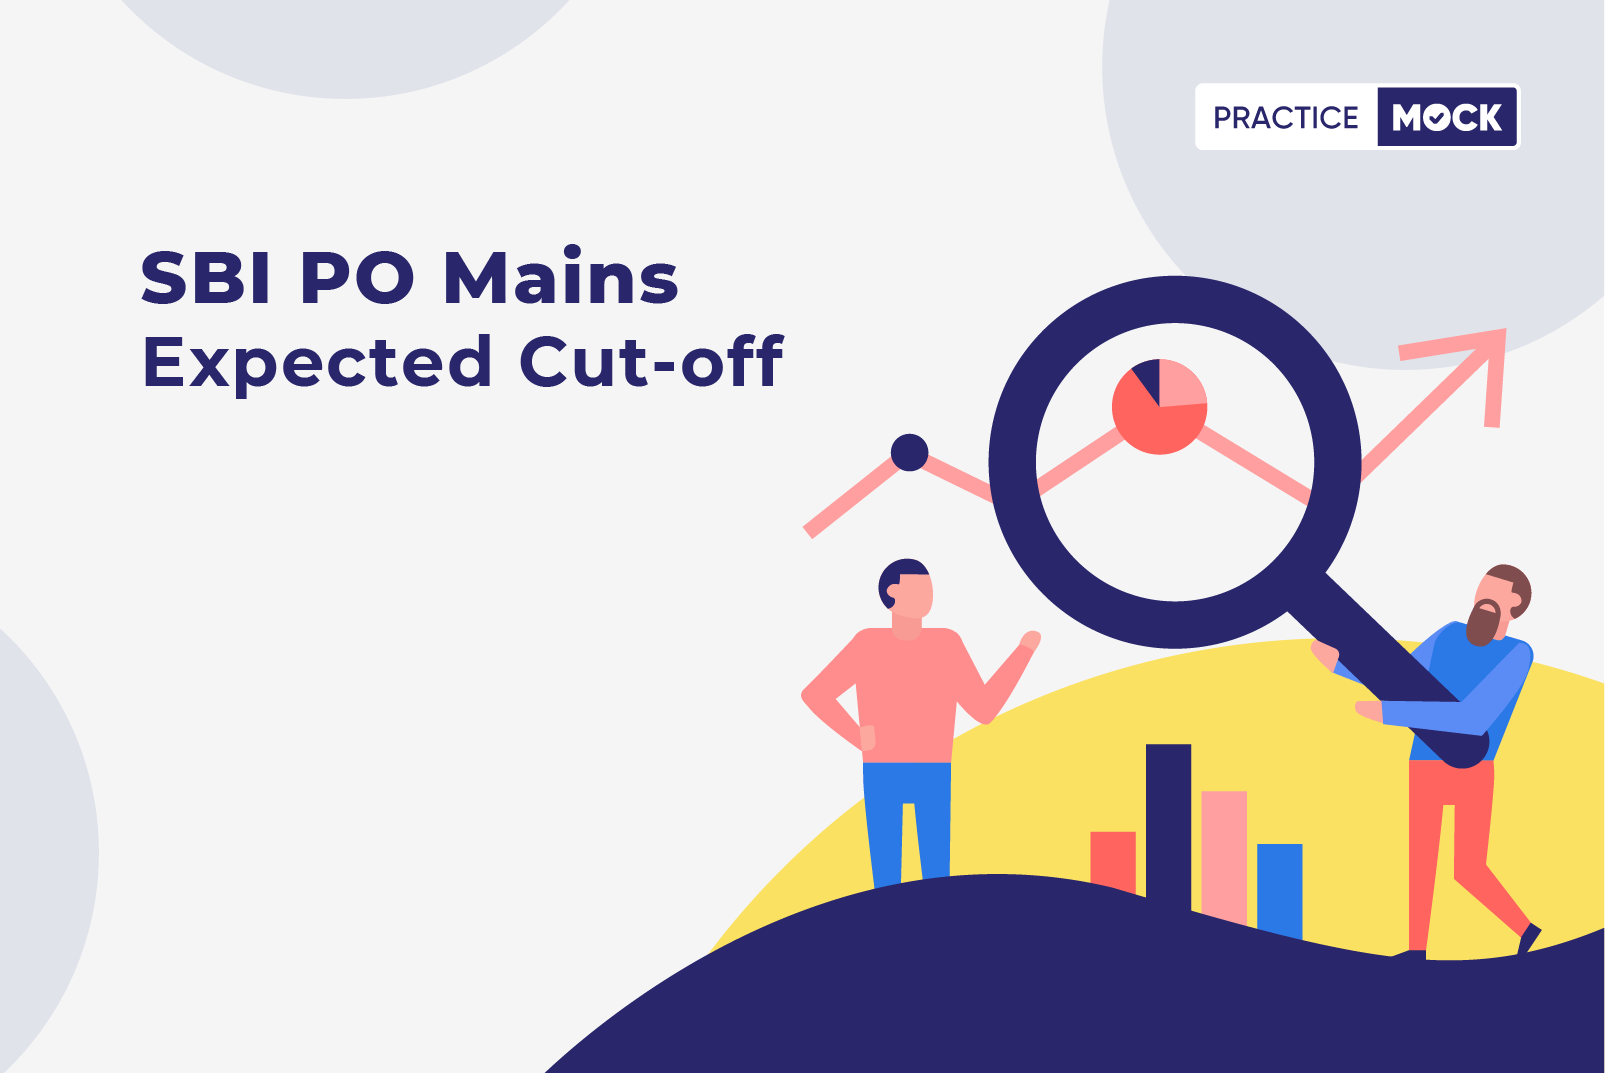 SBI PO Mains Expected Cut-off 2021-22